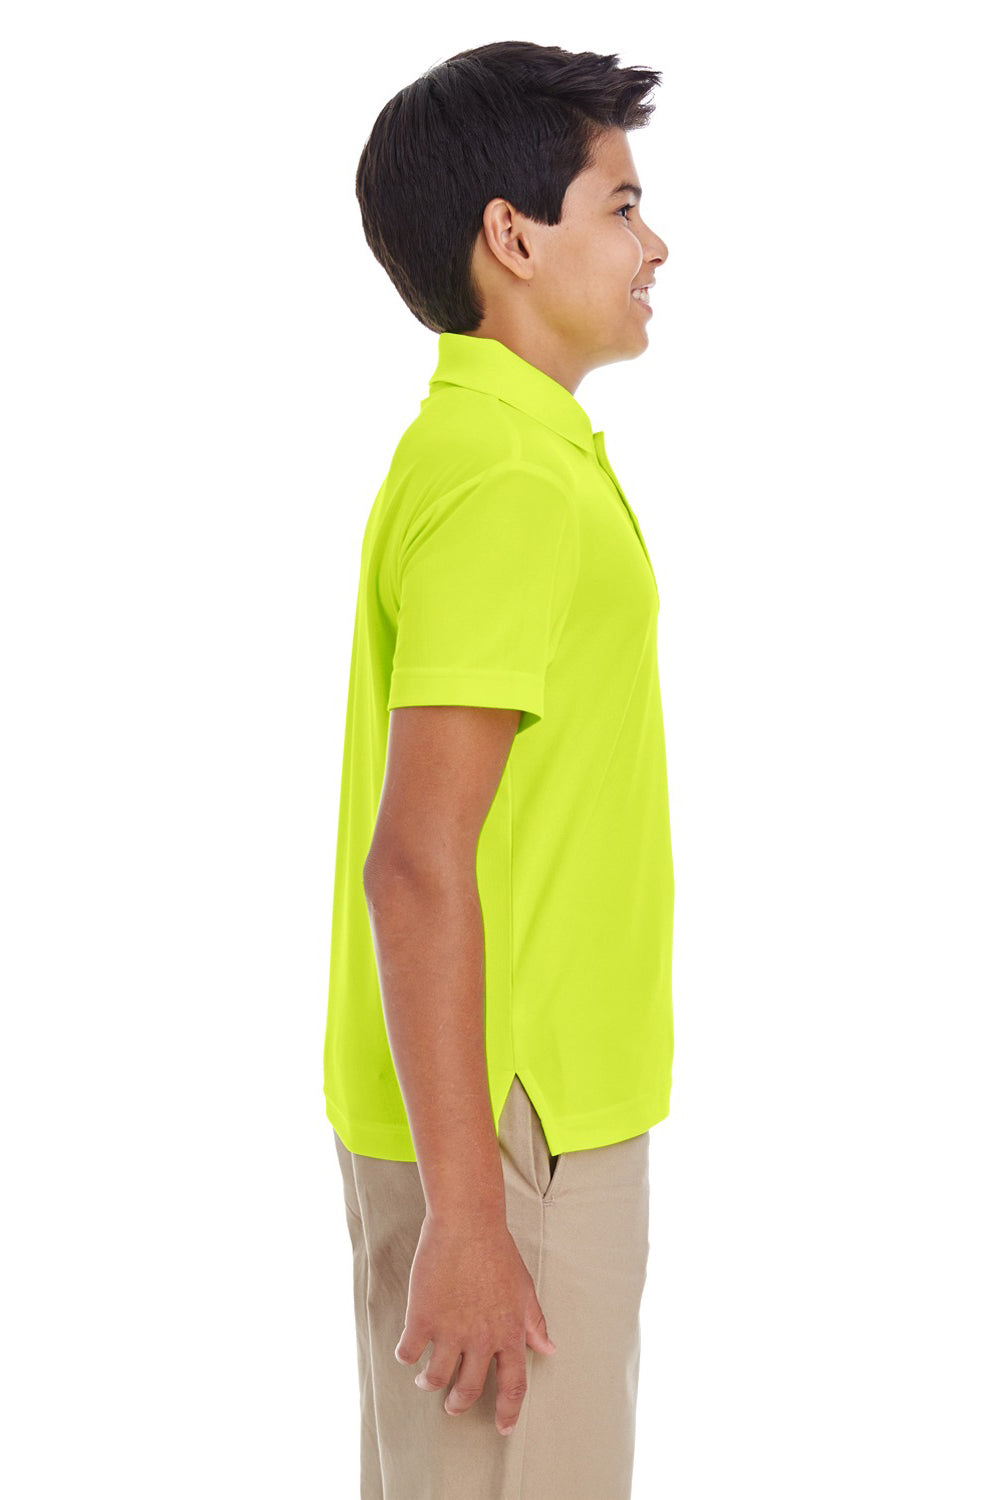 Core 365 88181Y Youth Origin Performance Moisture Wicking Short Sleeve Polo Shirt Safety Yellow Side